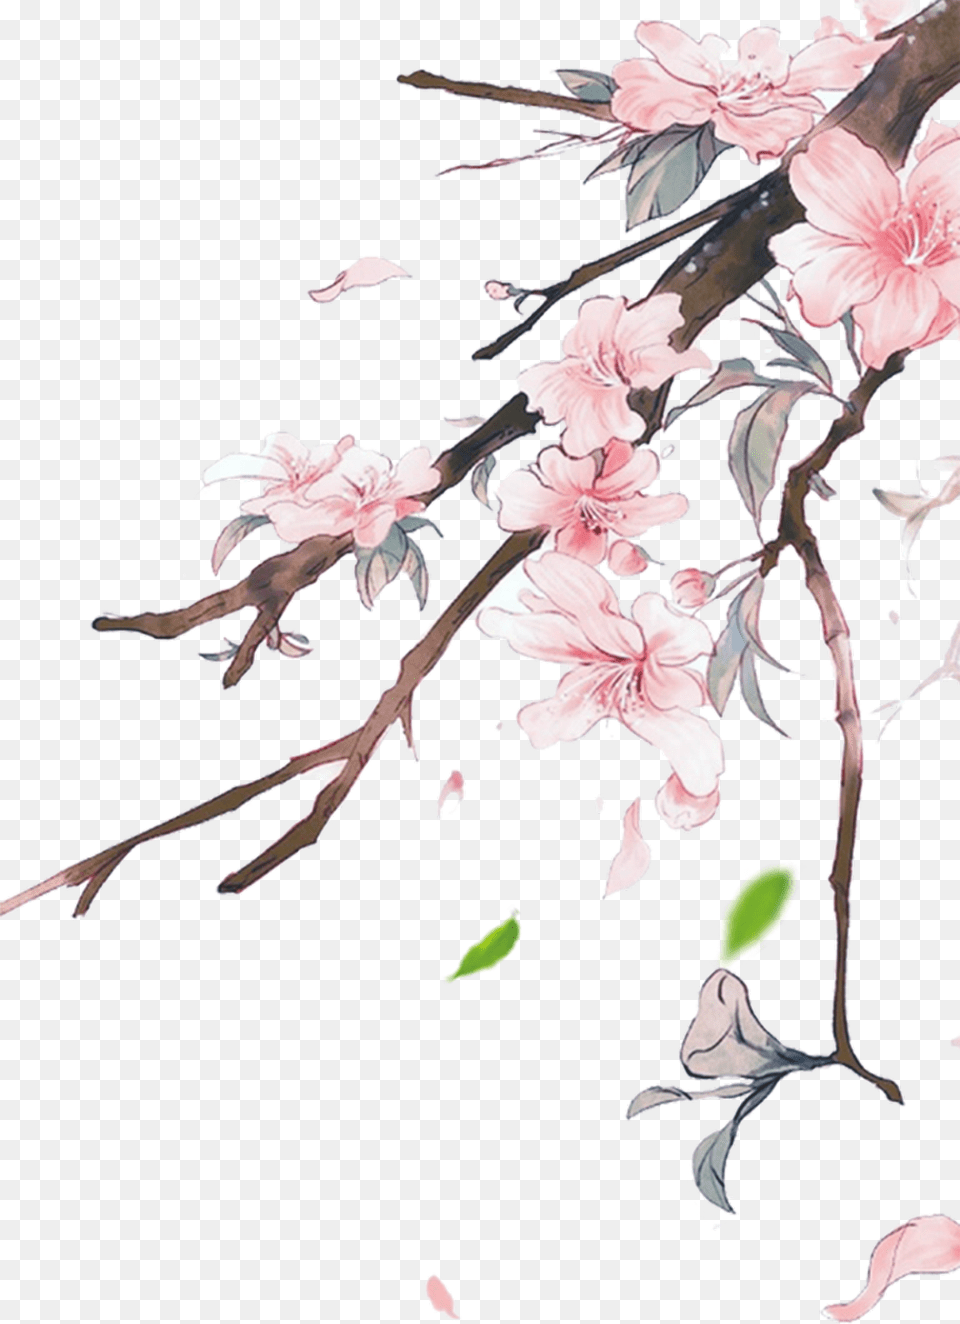 Flowers Pink Pinkflowers Japanese Nature Ftestickers Transparent Background Chinese Flowers Transparent, Flower, Plant, Cherry Blossom, Petal Png